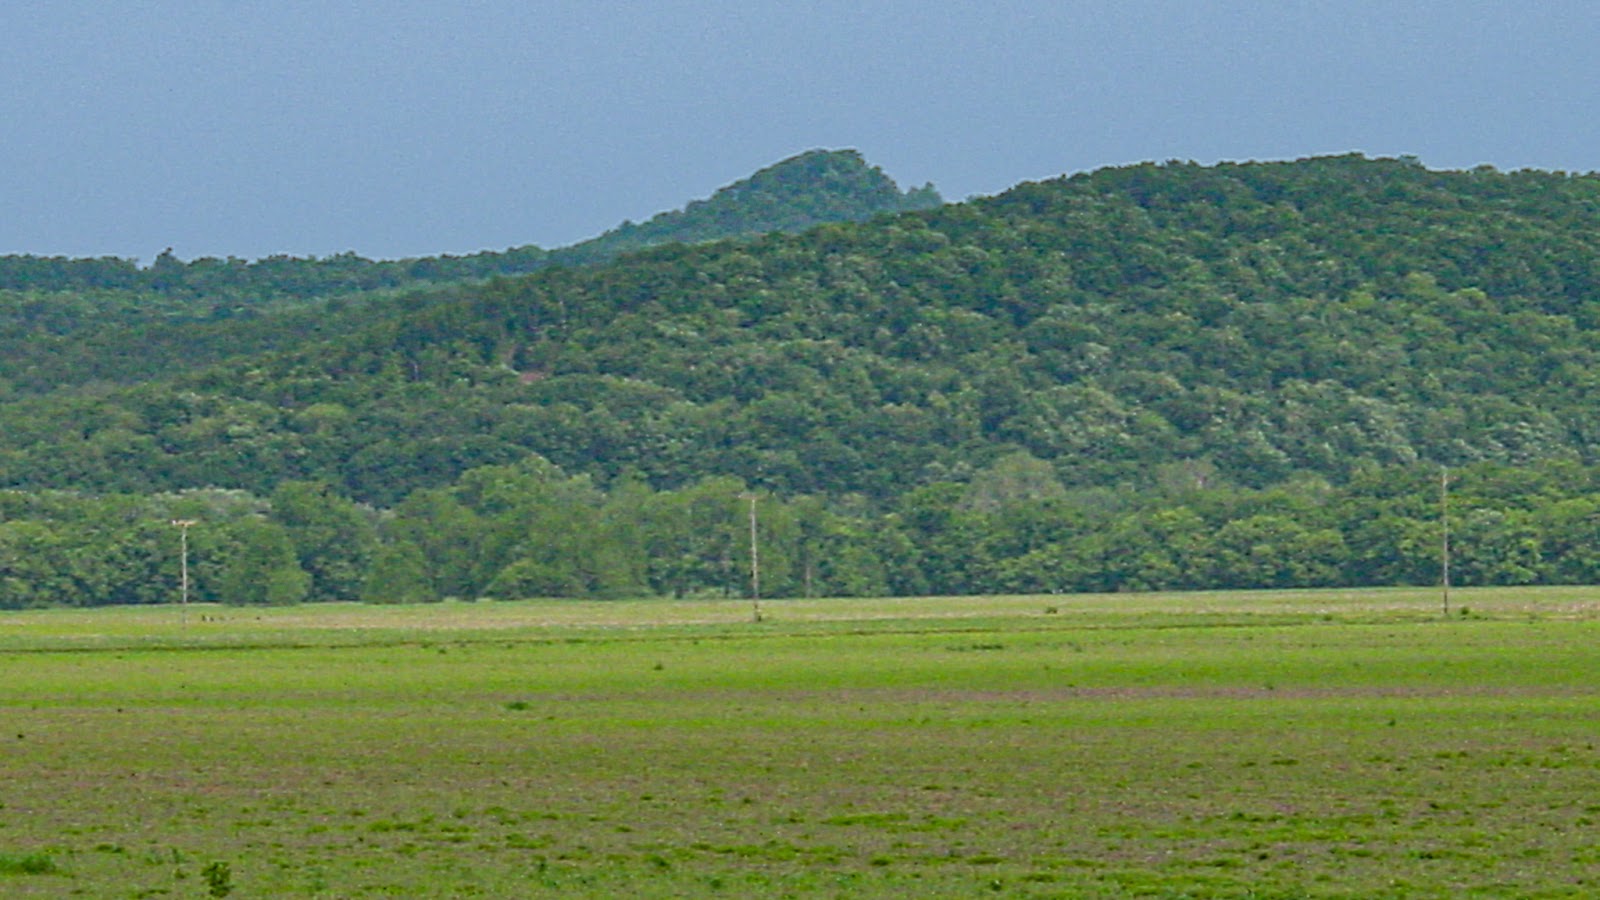 Green field with small hill and blue sky in the distance